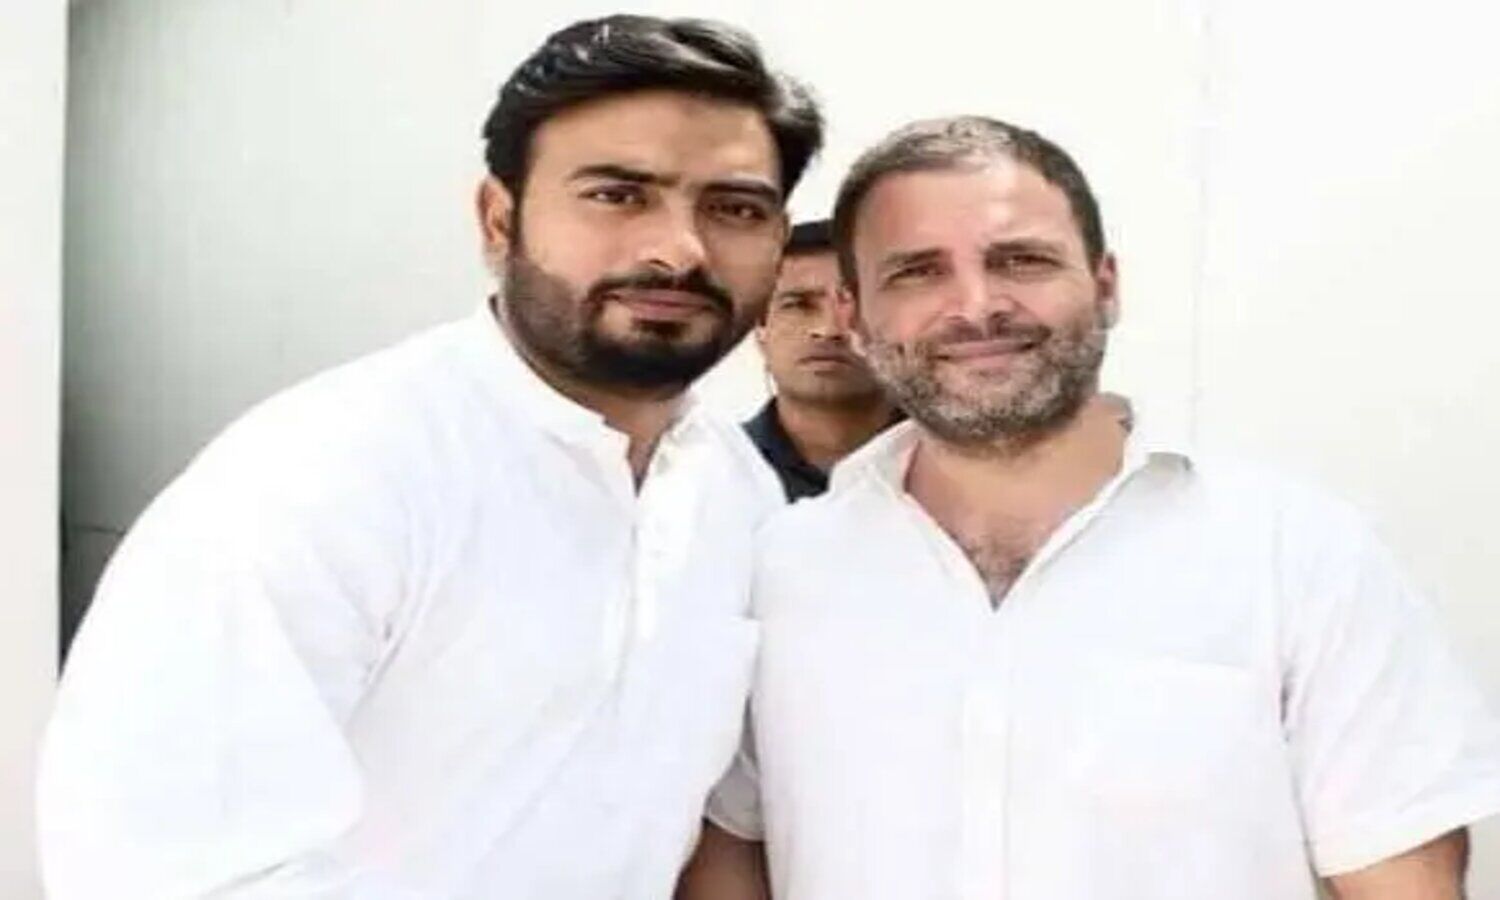 Ali Mehdi: Delhi Vice President of Congress returned home within a few hours, said Rahul’s worker